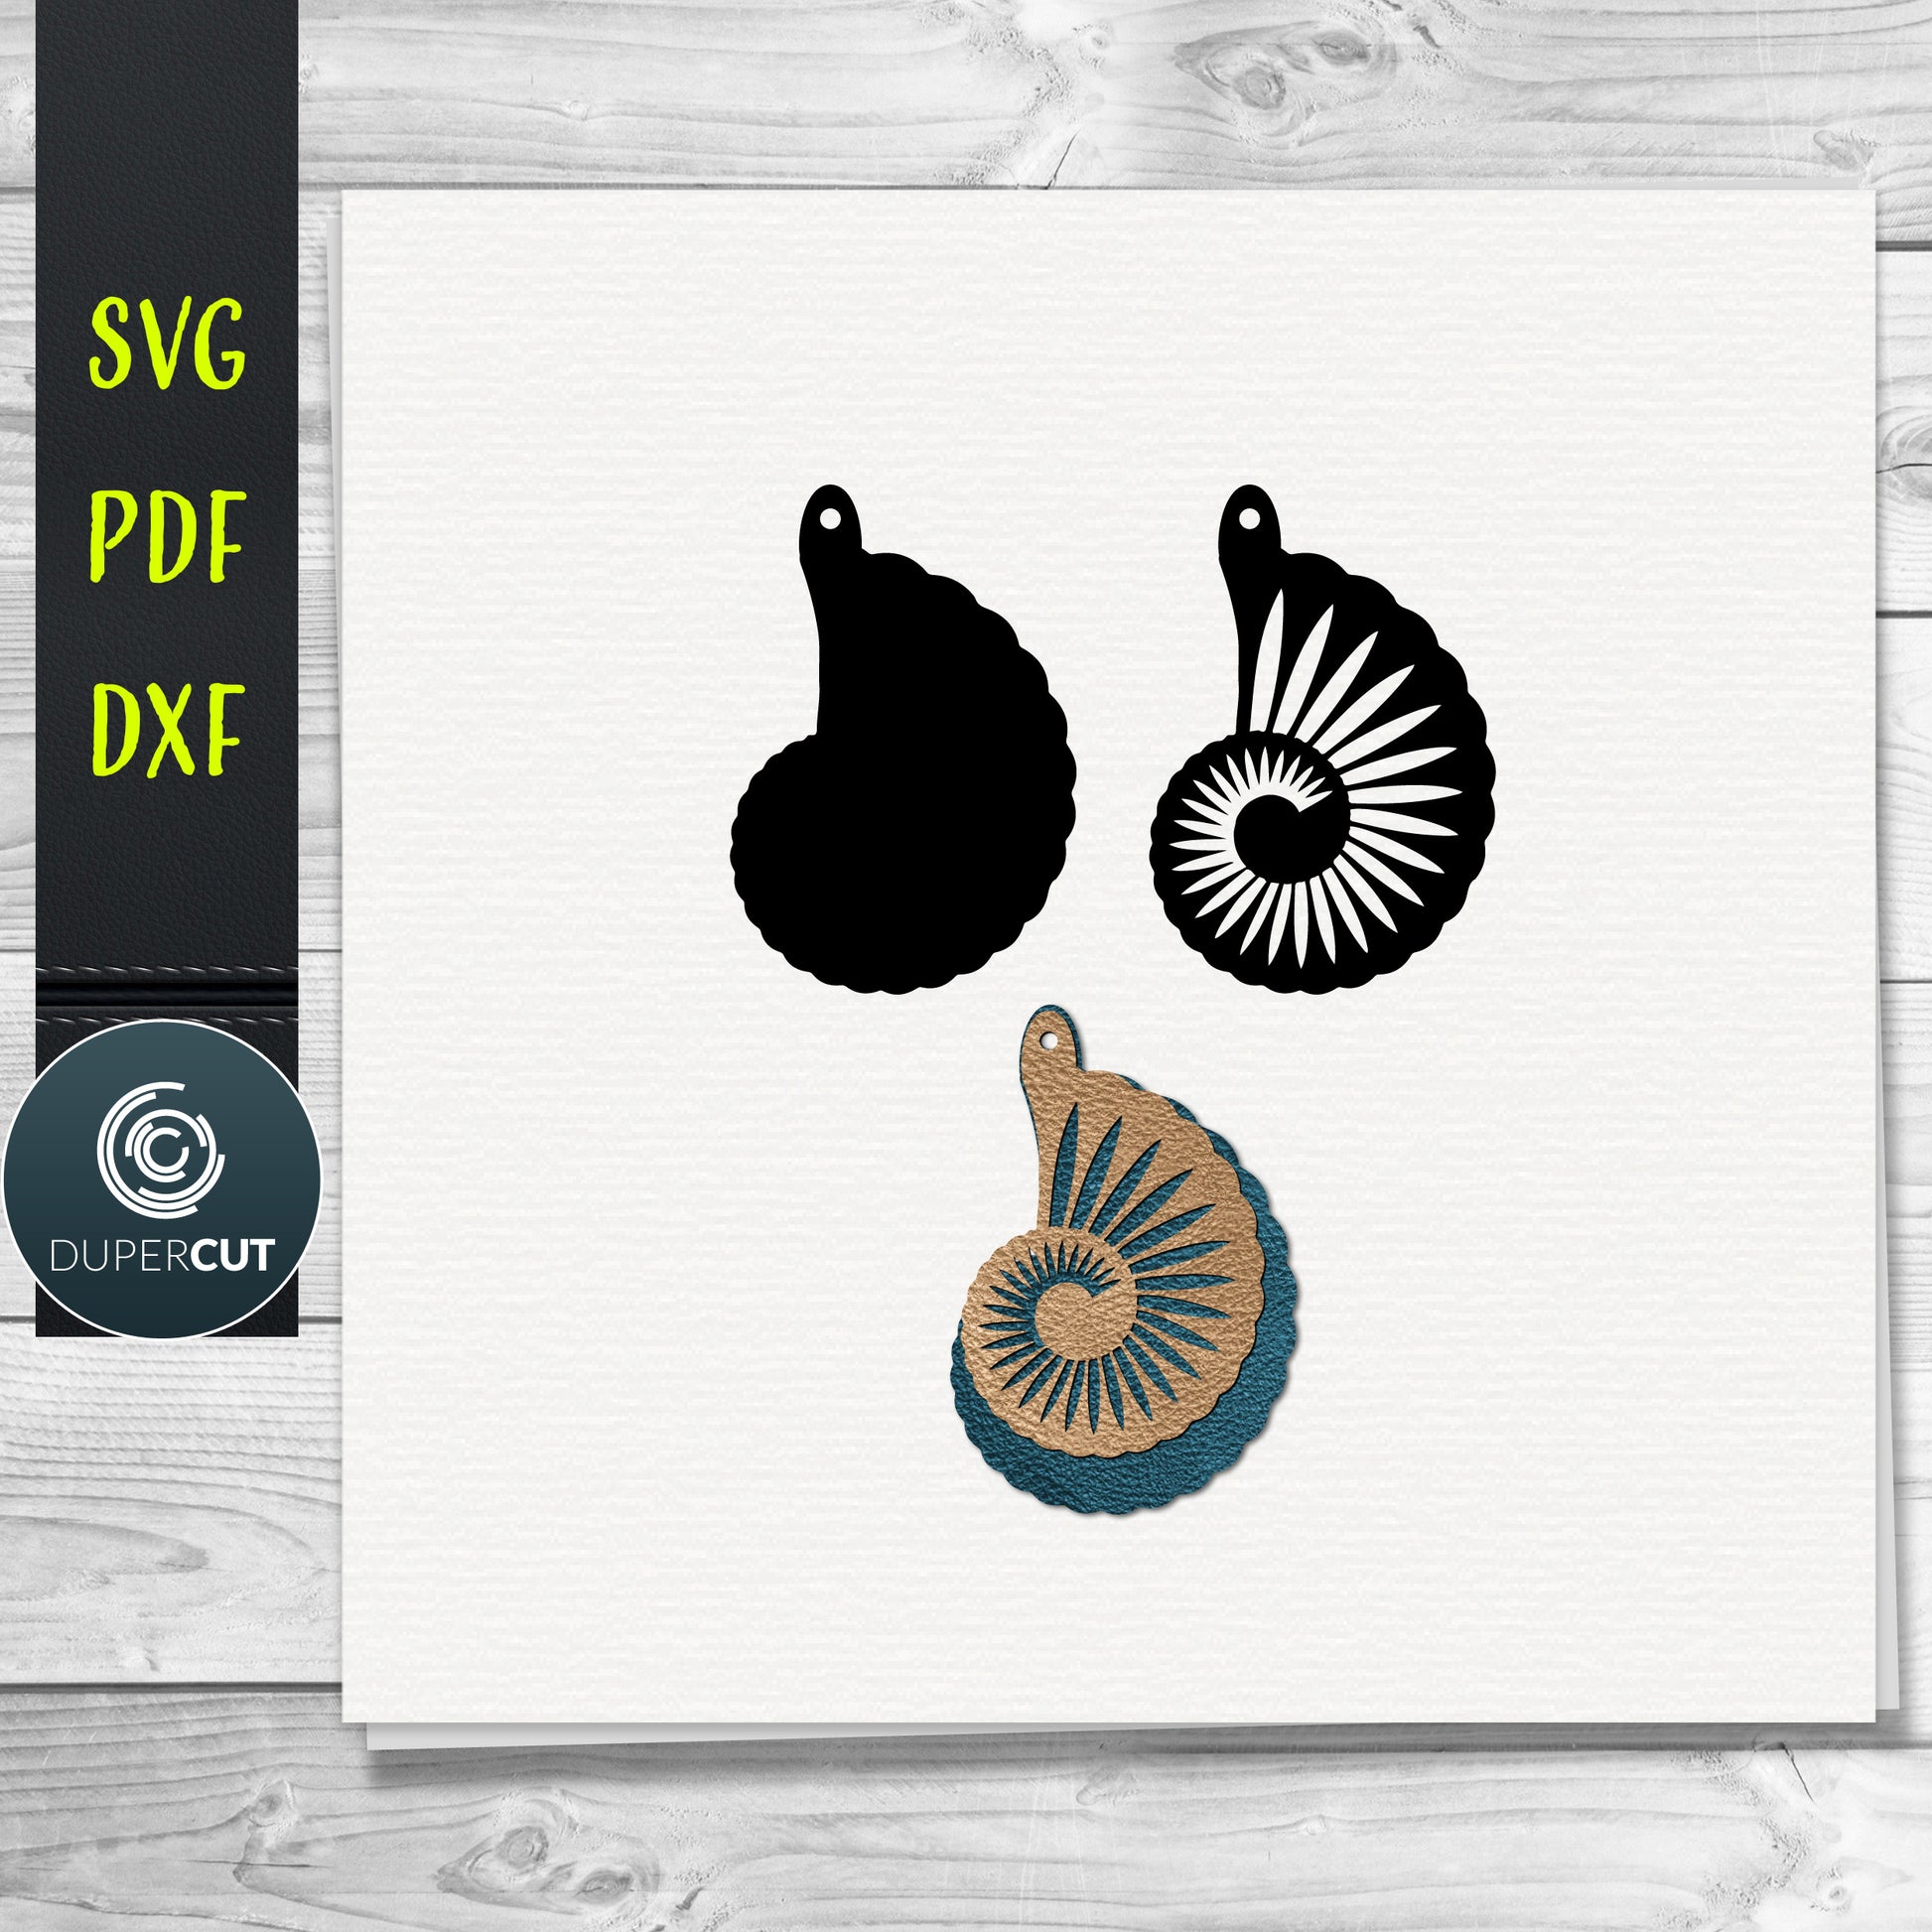 DIY Sea shells Layered Leather Earrings SVG PDF DXF vector files. Jewellery making template for laser and cutting machines - Glowforge, Cricut, Silhouette Cameo.